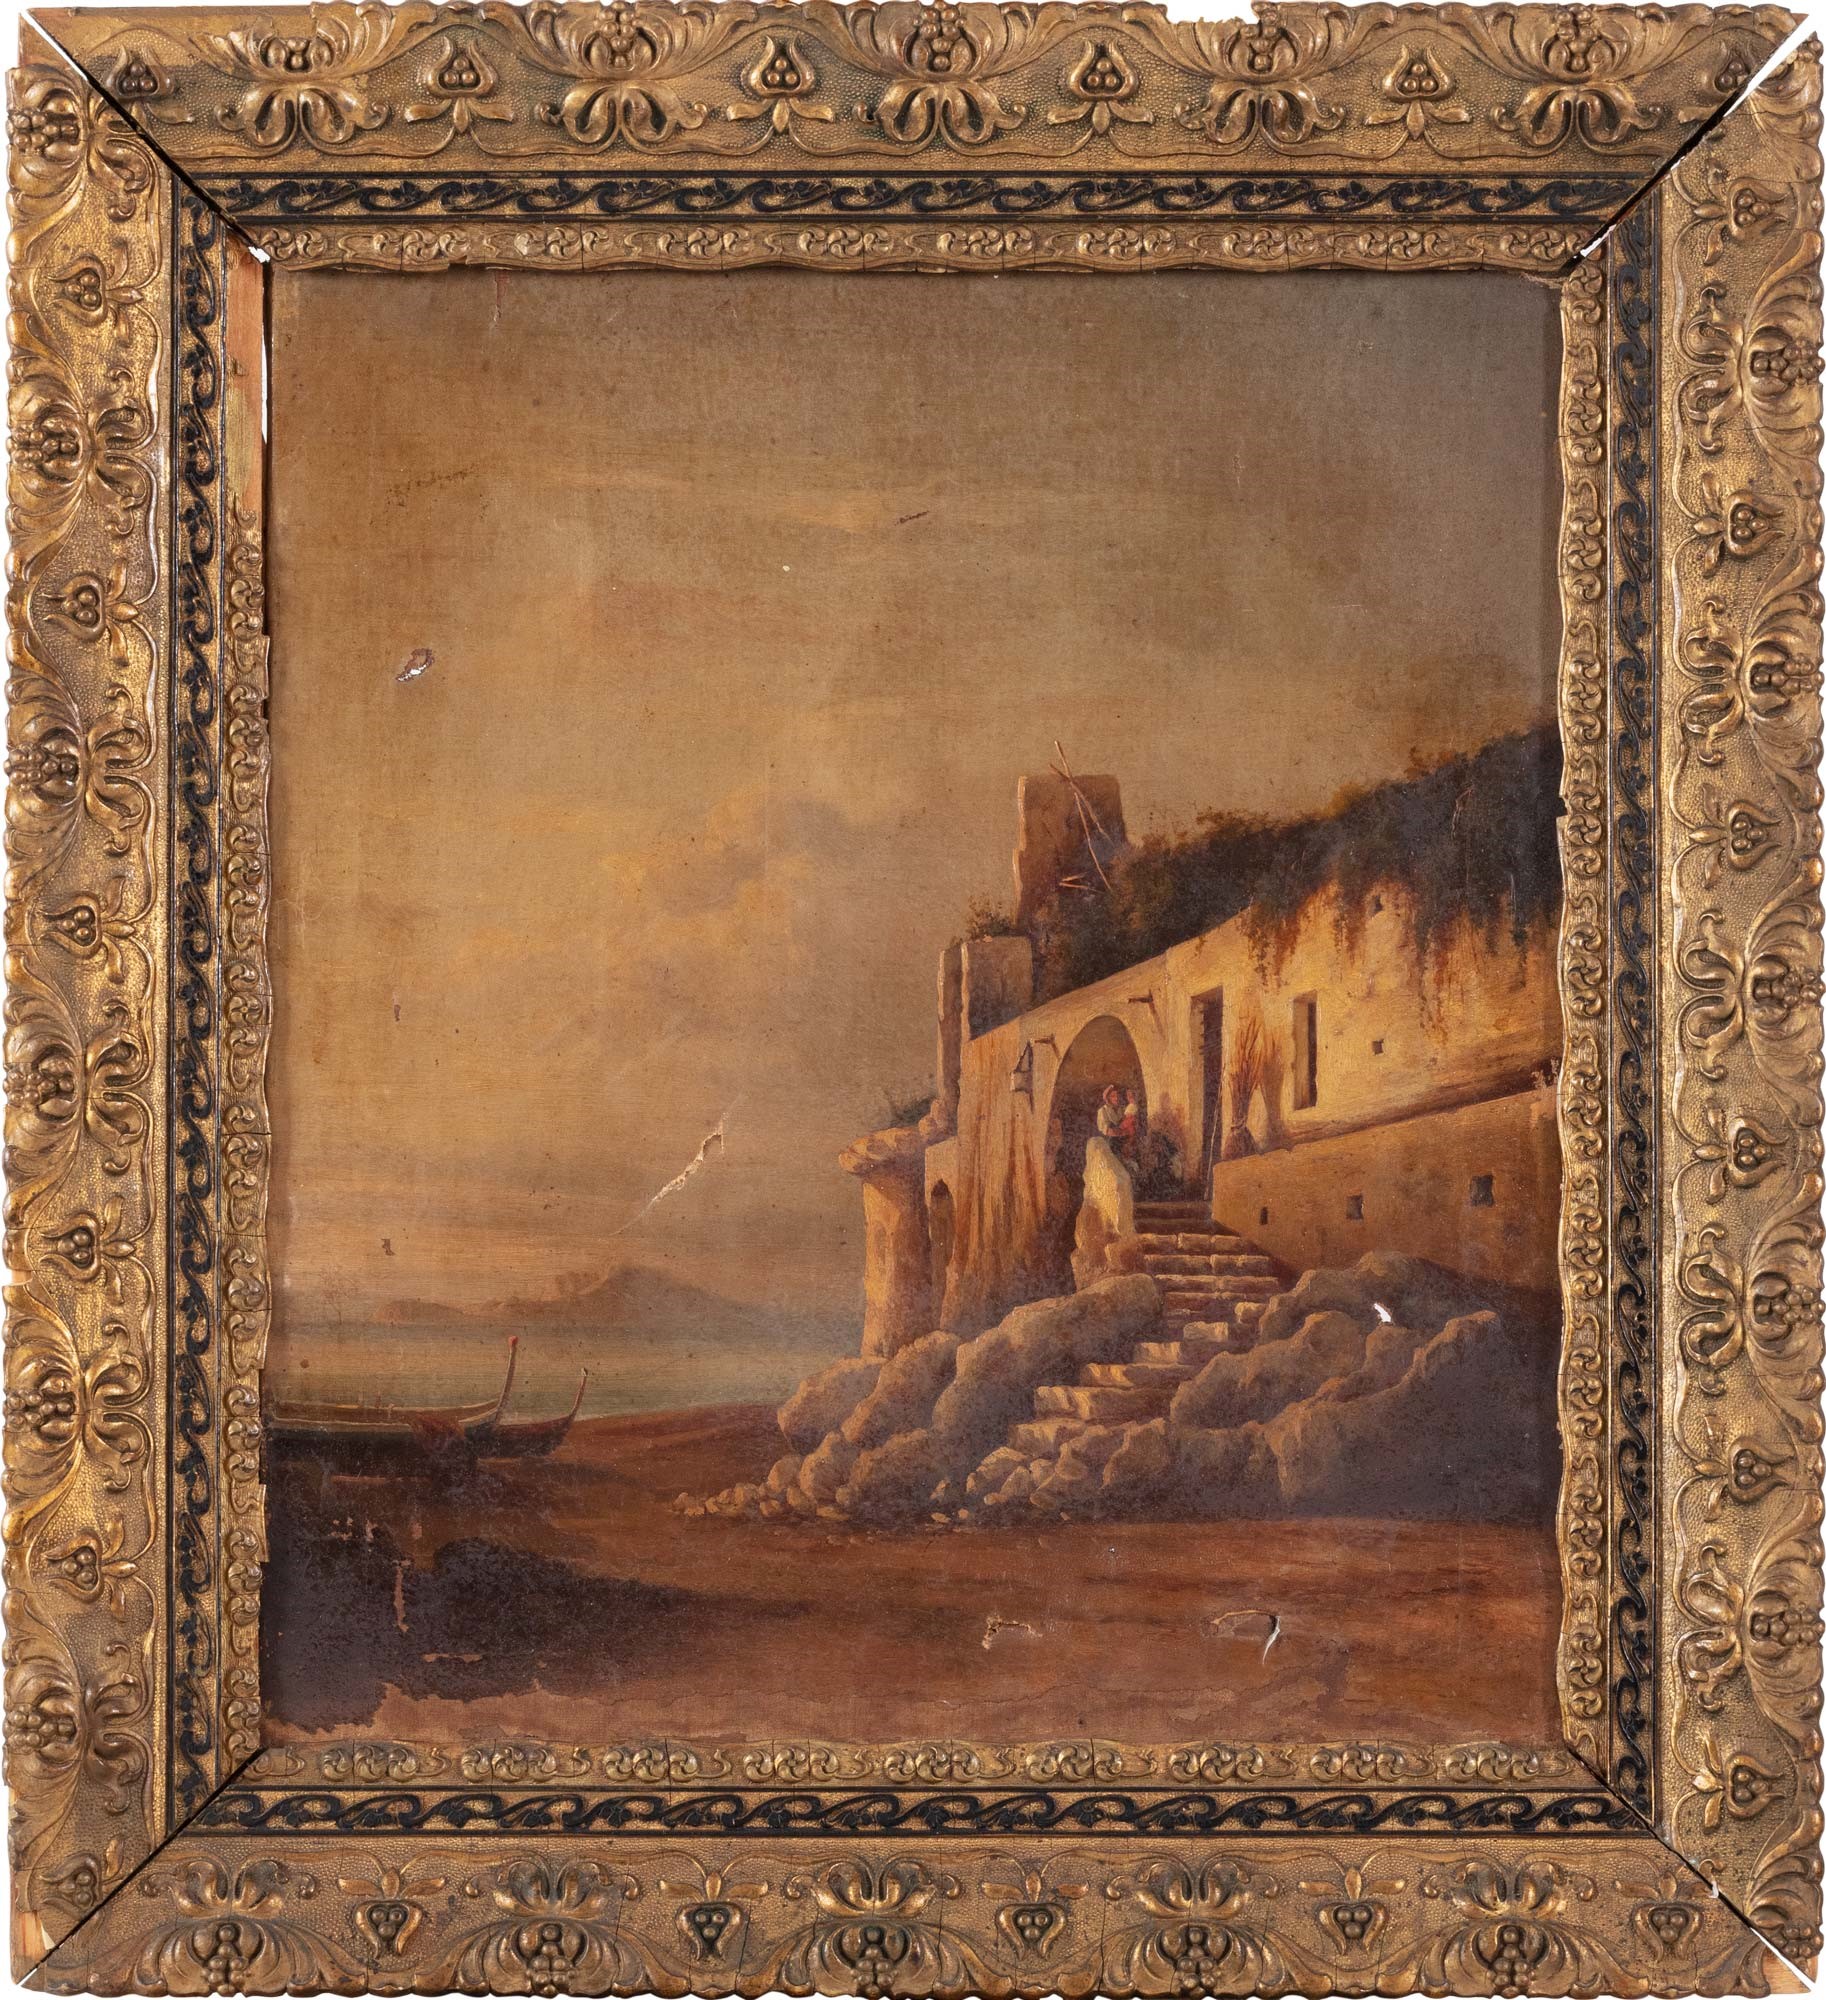 View of the coast with figures late 19th century, oil painting on canvasdrops of color, small - Image 2 of 6